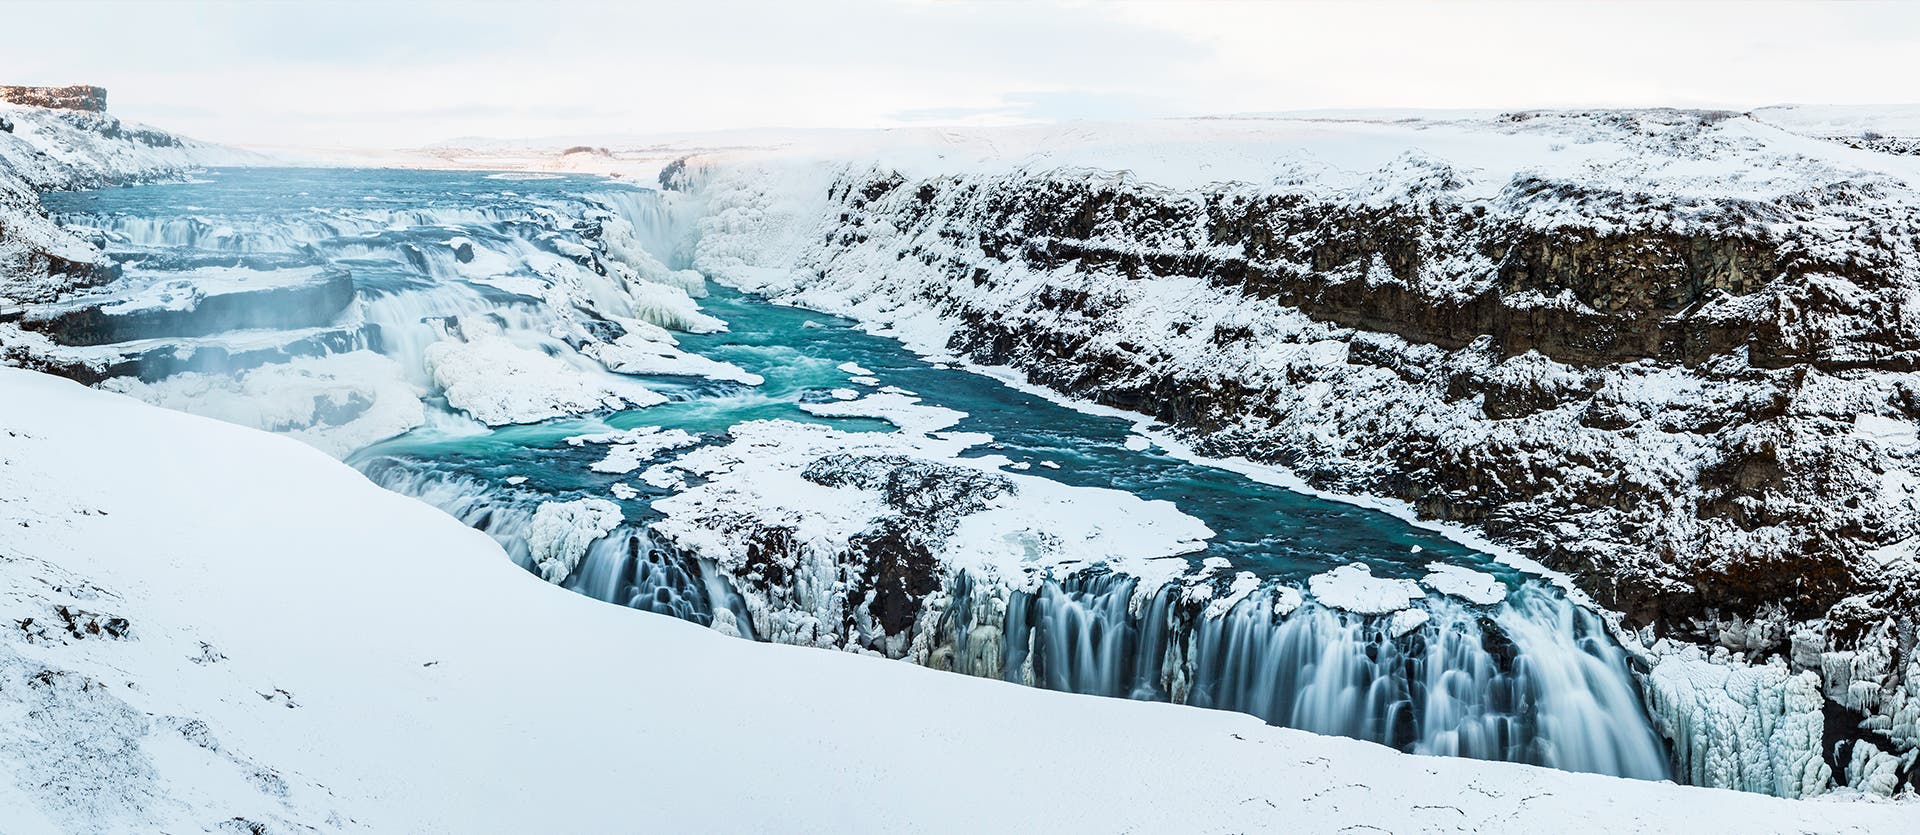 What to see in Iceland Gullfoss Waterfall